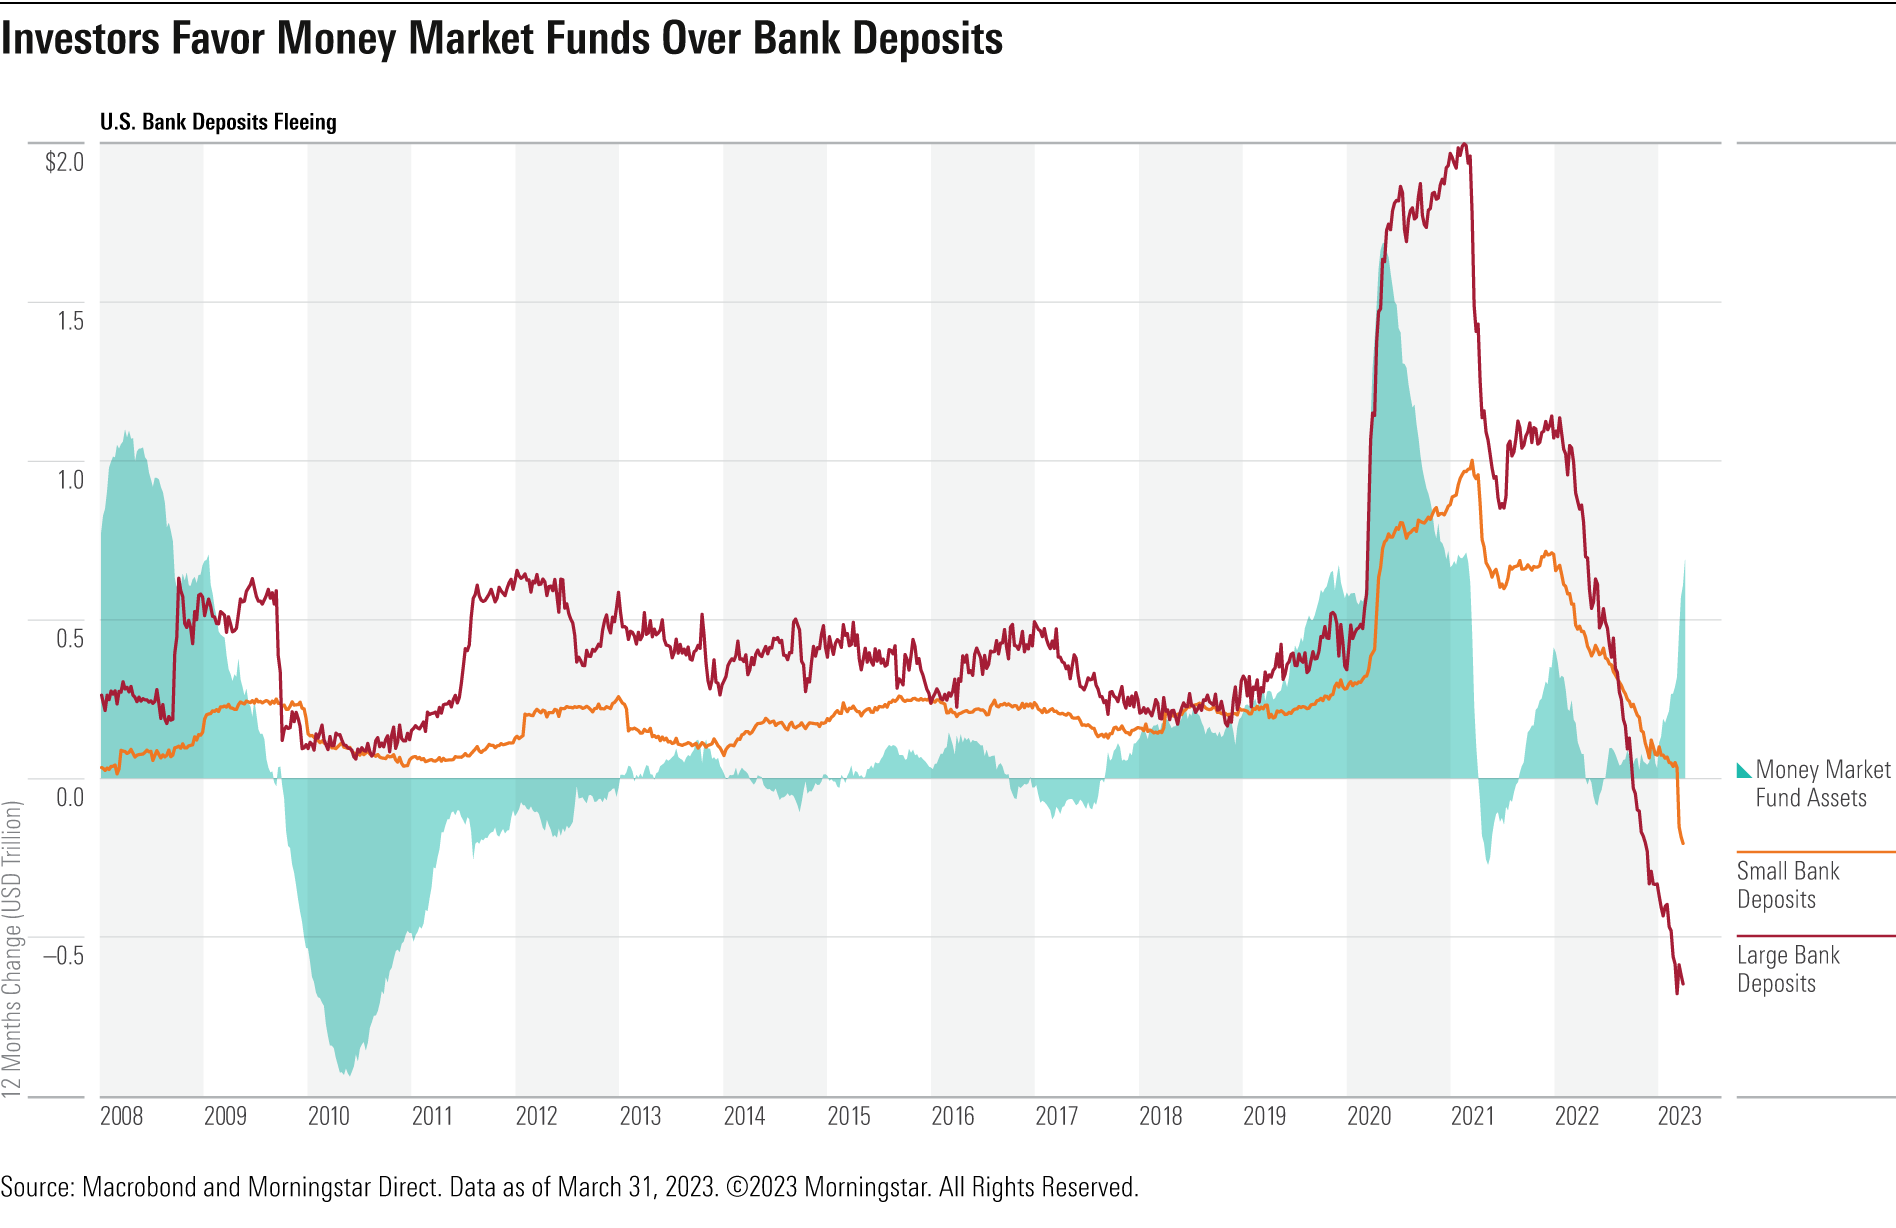 Line chart showing inflows and outflows from U.S. banks since 2008, compared to overall assets held in money market funds.